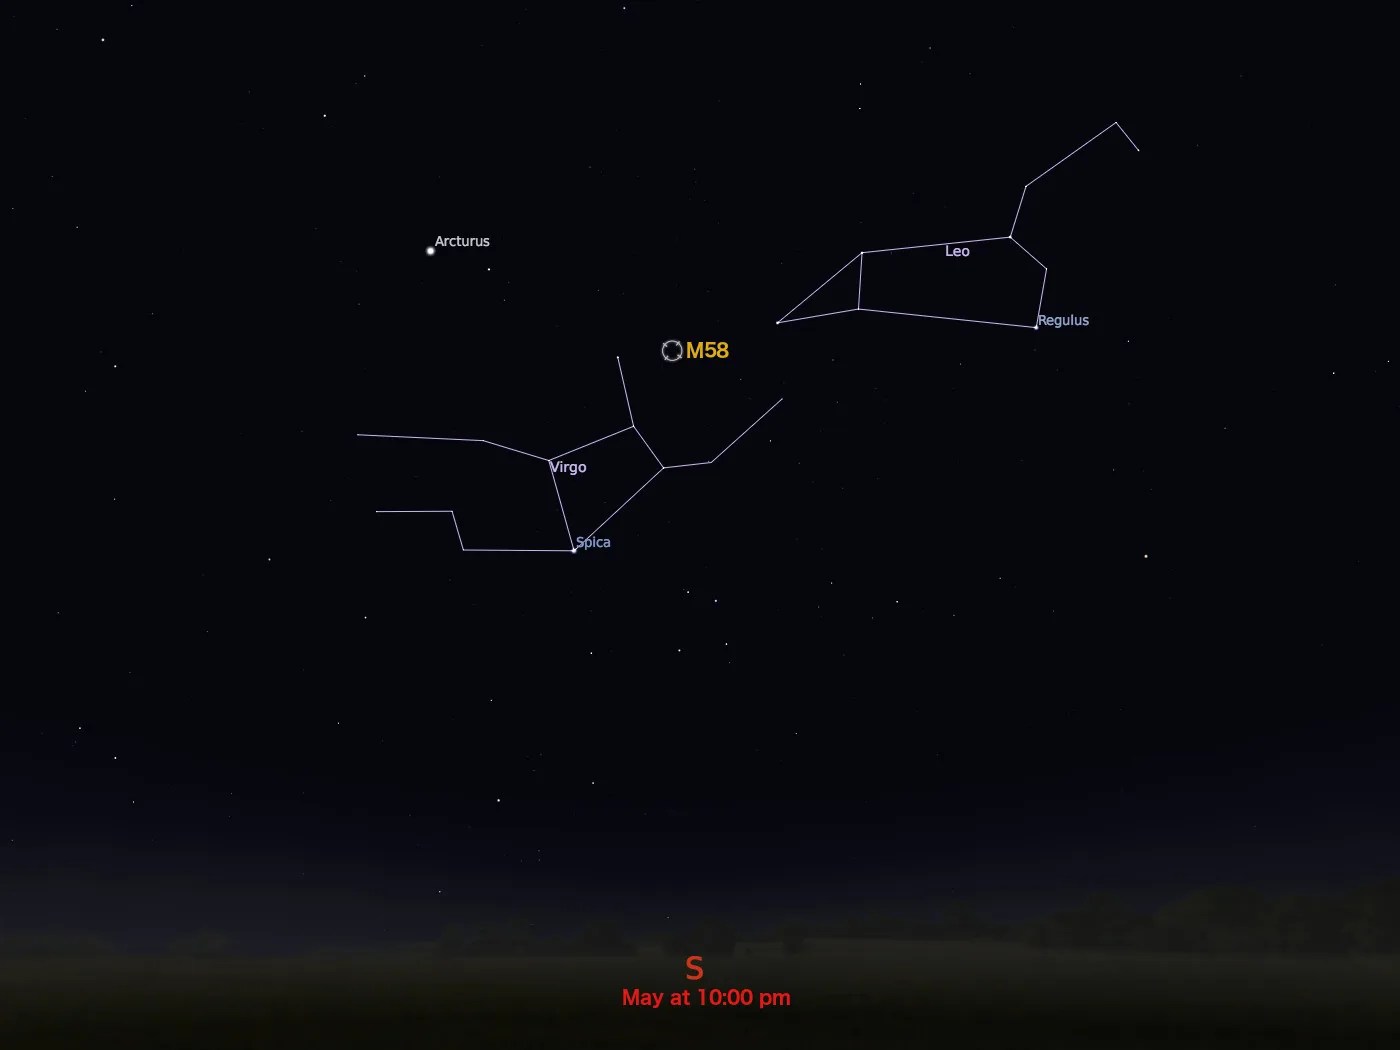 star chart showing location in night sky of M58